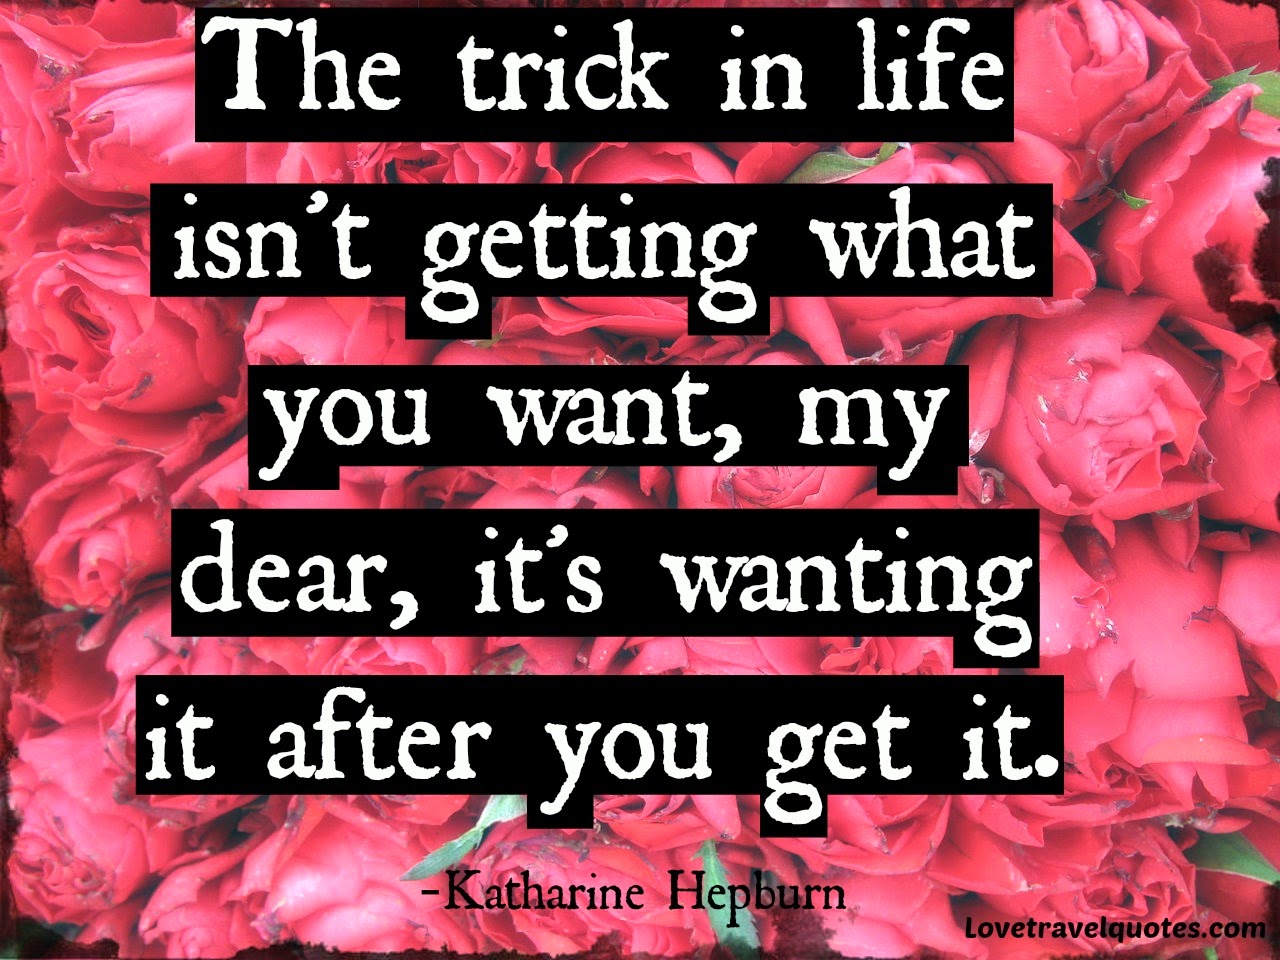 The trick in Life isn't getting what you want, my dear, it's wanting it after you get it